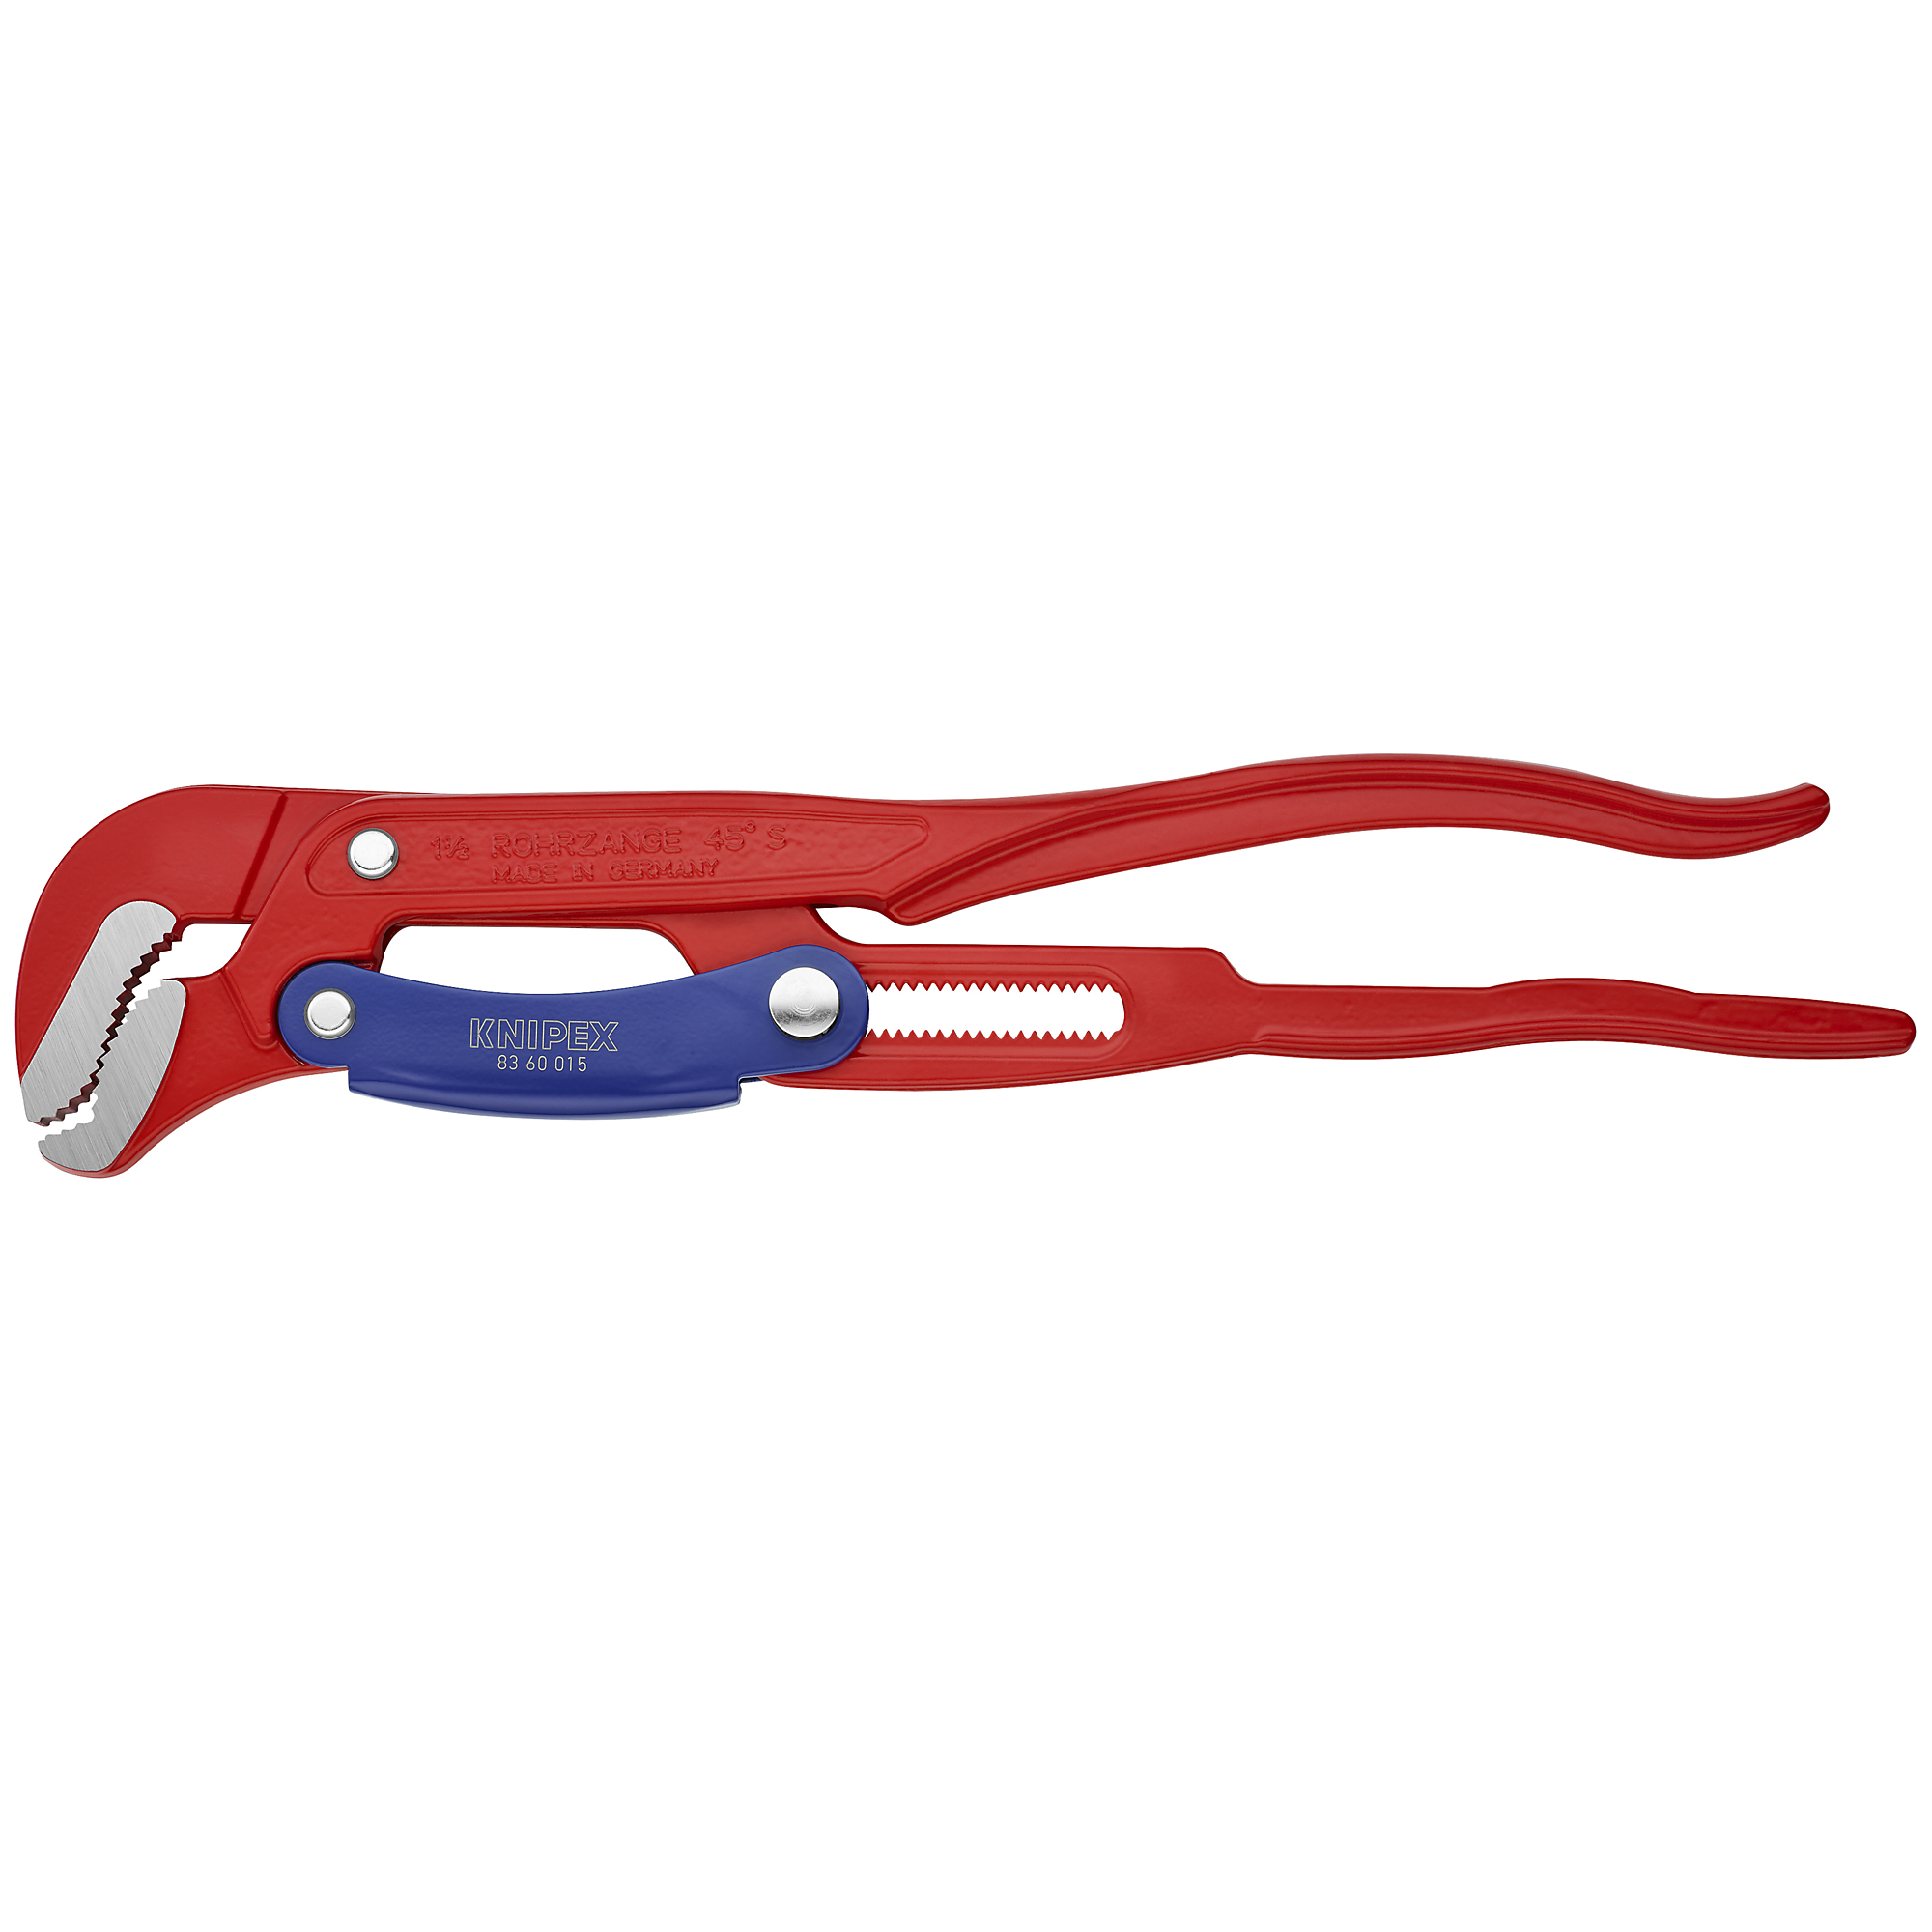 KNIPEX, Rapid Adjust Swedish Pipe Wrench-S-Type, 16.5Inch, Pieces (qty.) 1 Material Steel, Jaw Capacity 2.046875 in, Model 83 60 015